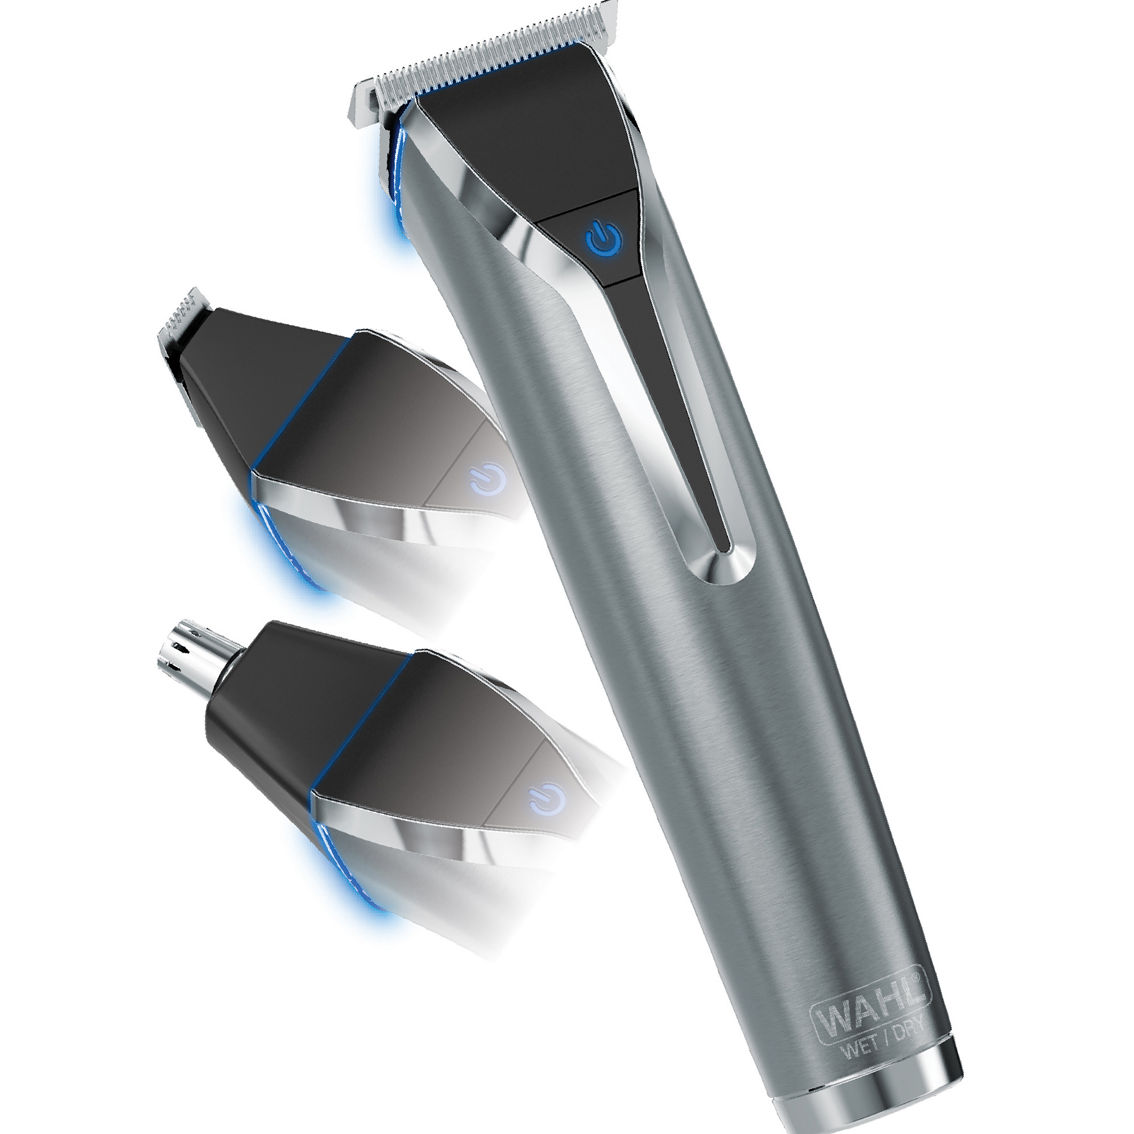 Wahl Stainless Steel Lithium Ion Trimmer - Image 3 of 3